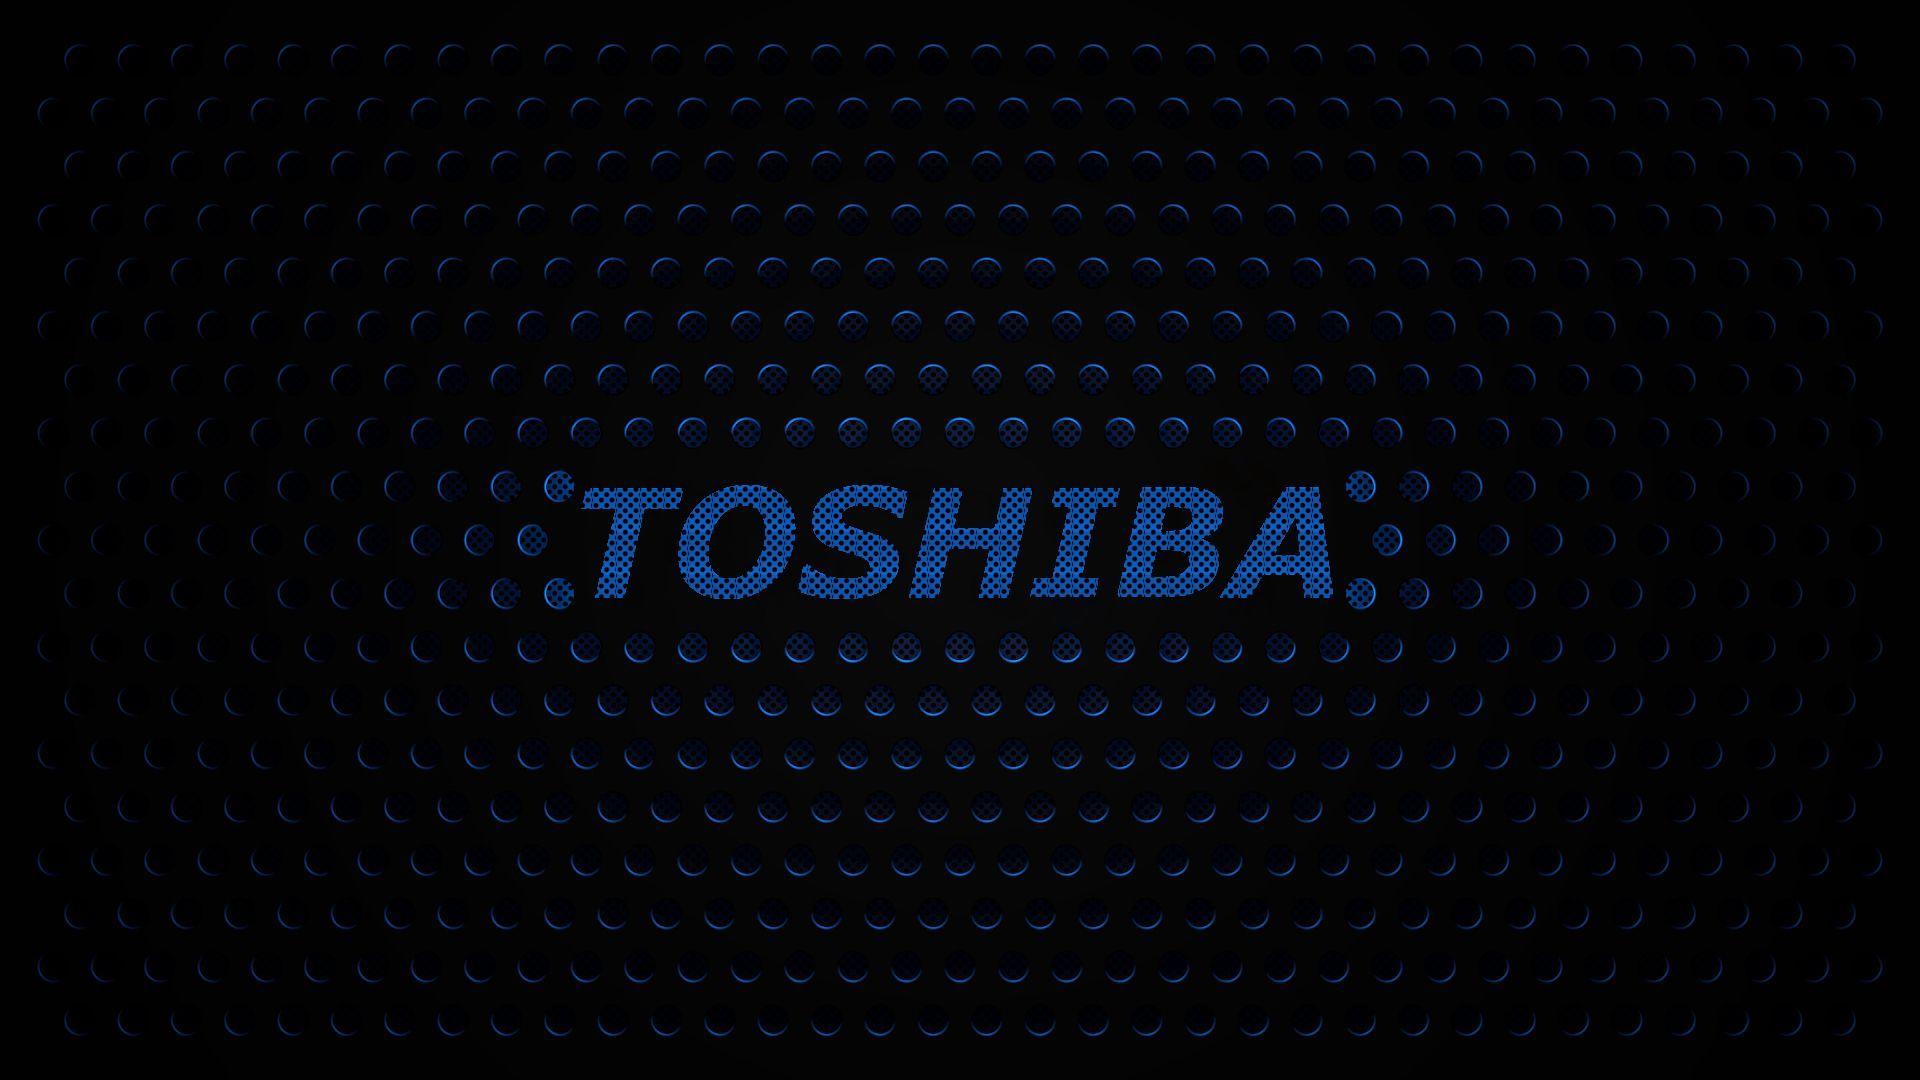 Wallpaper For Toshiba Laptop Gallery (77 Plus) PIC WPW2013110